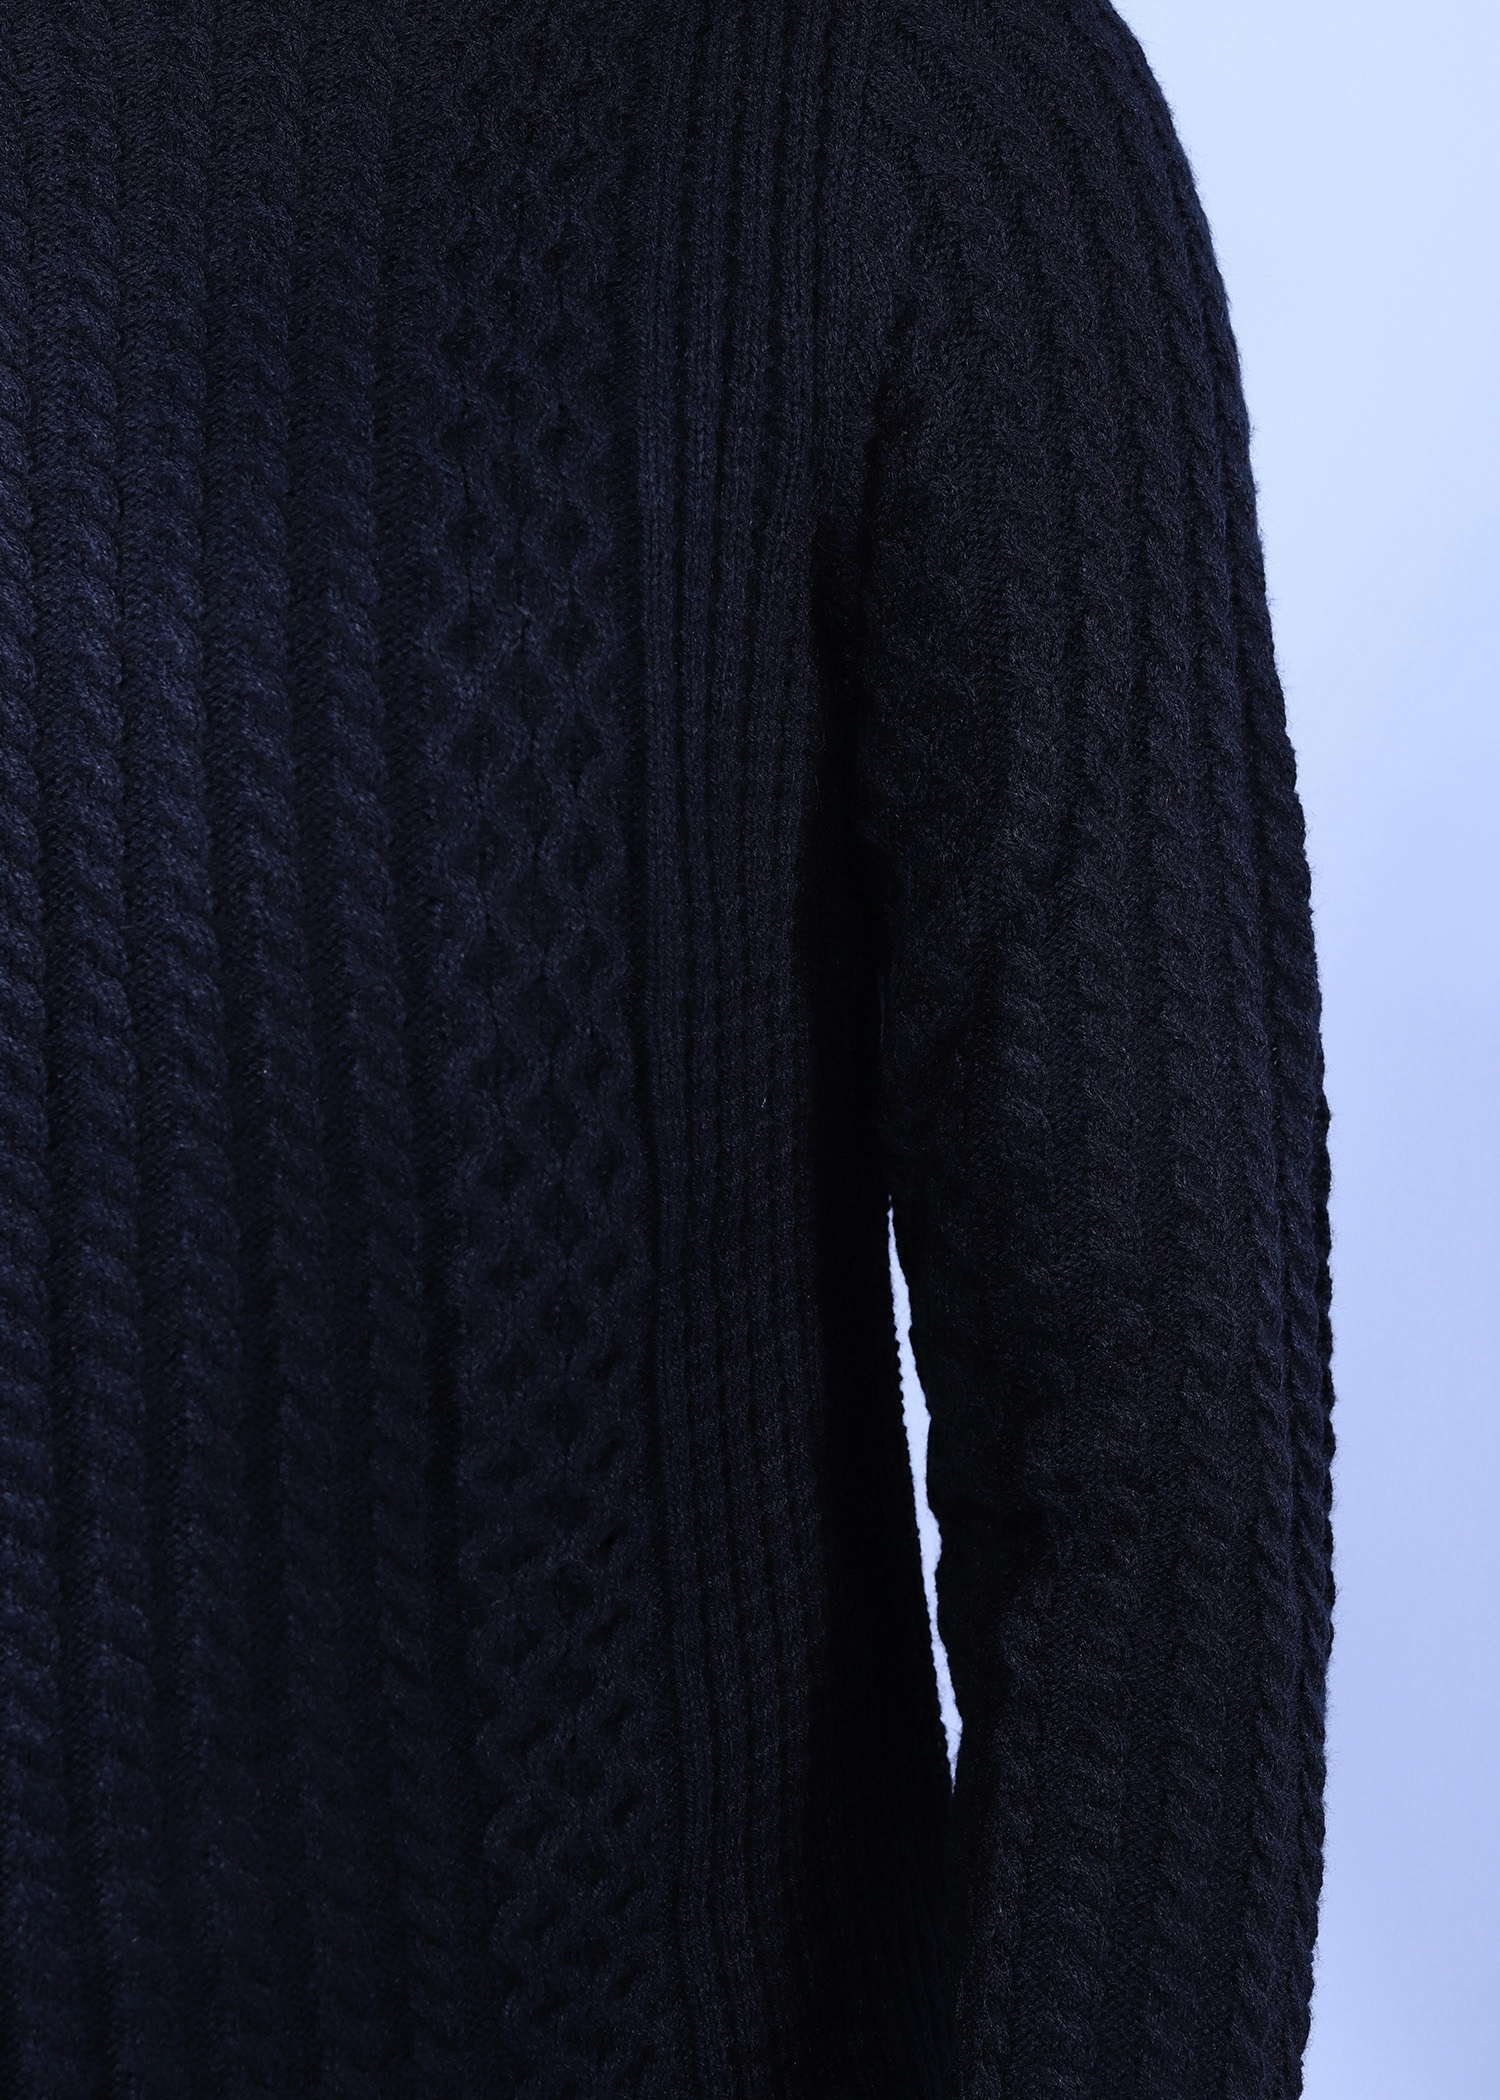 hillstar viii sweater black color close front view